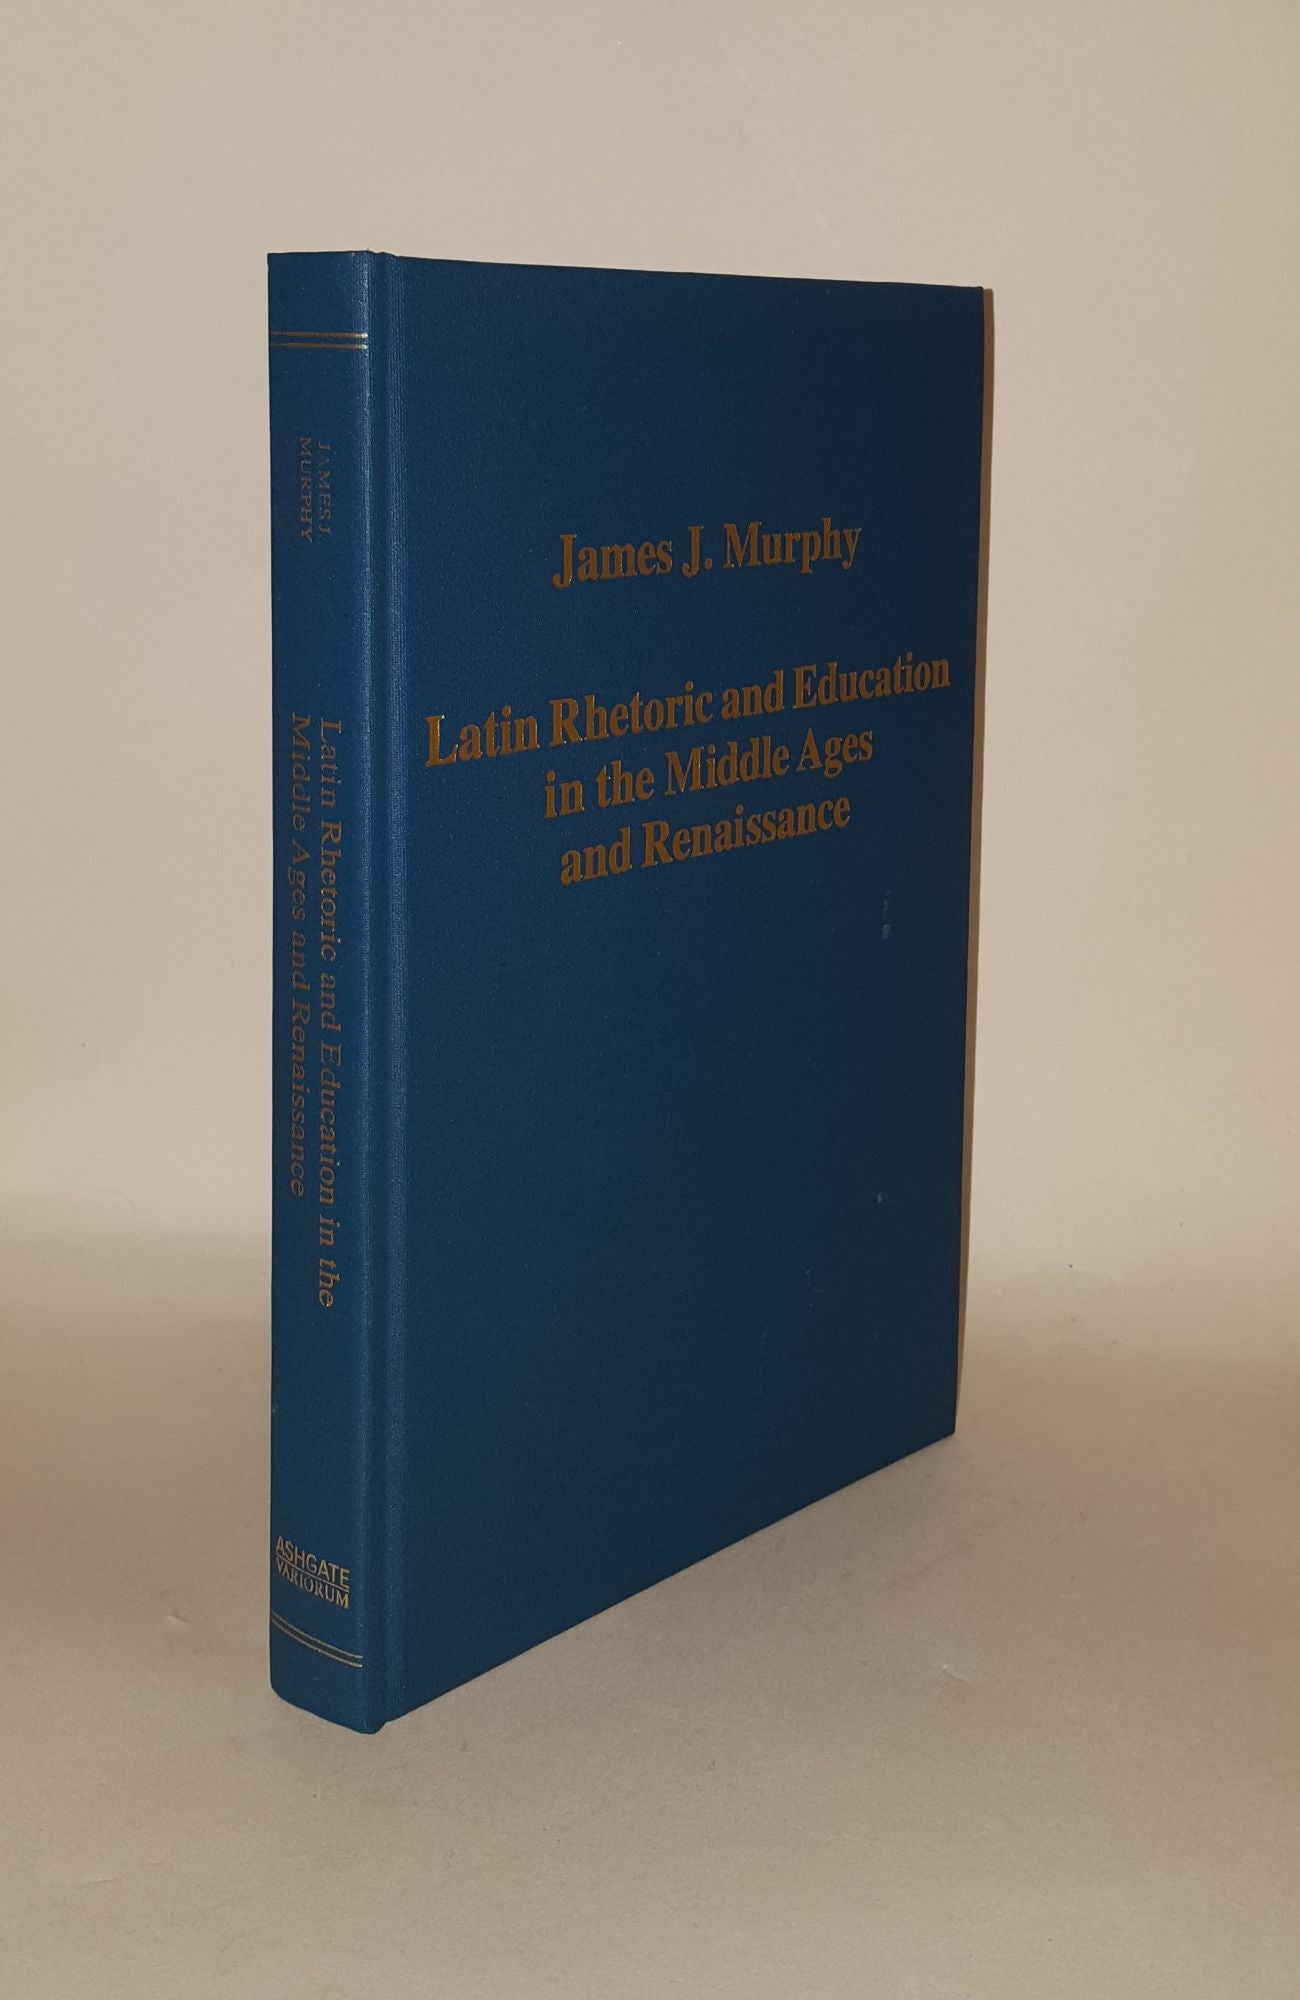 MURPHY James J. - Latin Rhetoric and Education in the Middle Ages and Renaissance (Variorum Collected Studies)